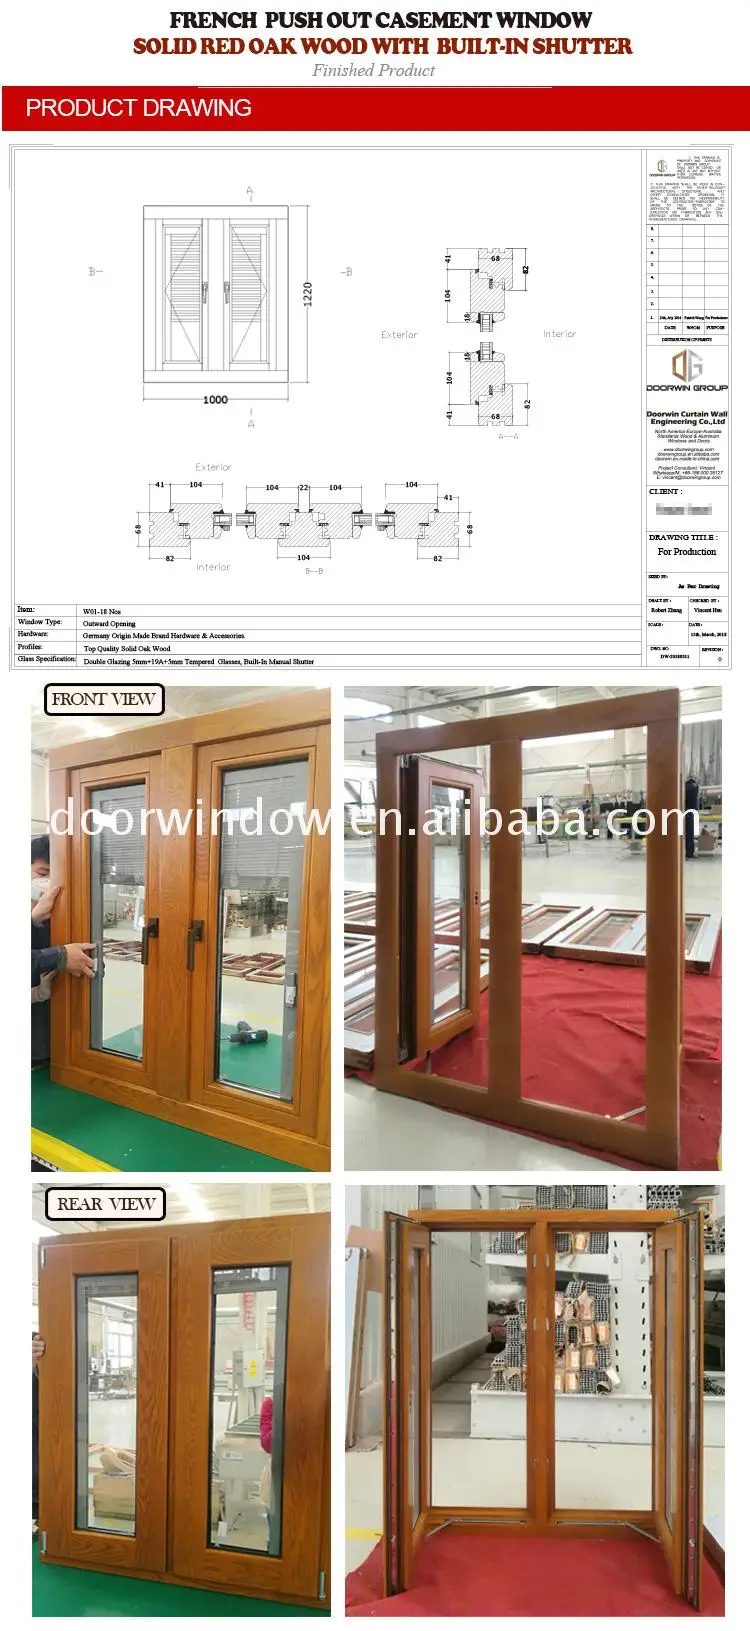 Hot sale factory direct european style windows suppliers and doors curved glass garden window